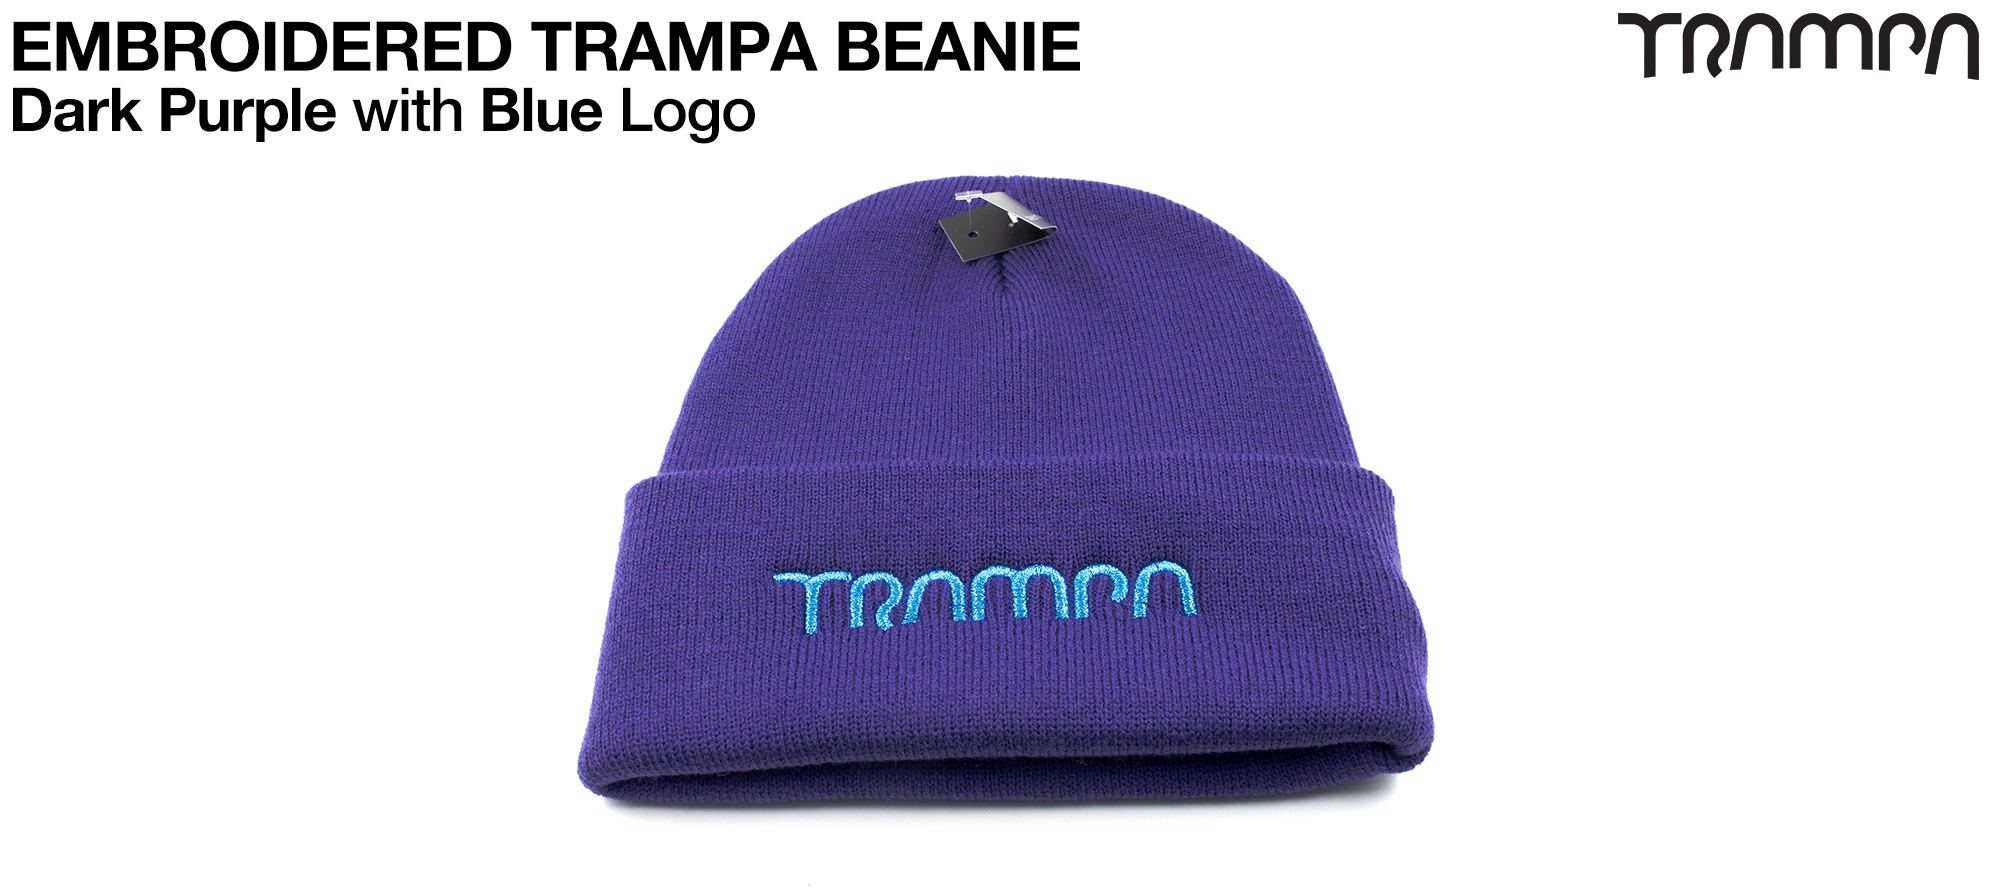 PURPLE Woolly hat with Vivid ELECTRIC BLUE TRAMPA logo